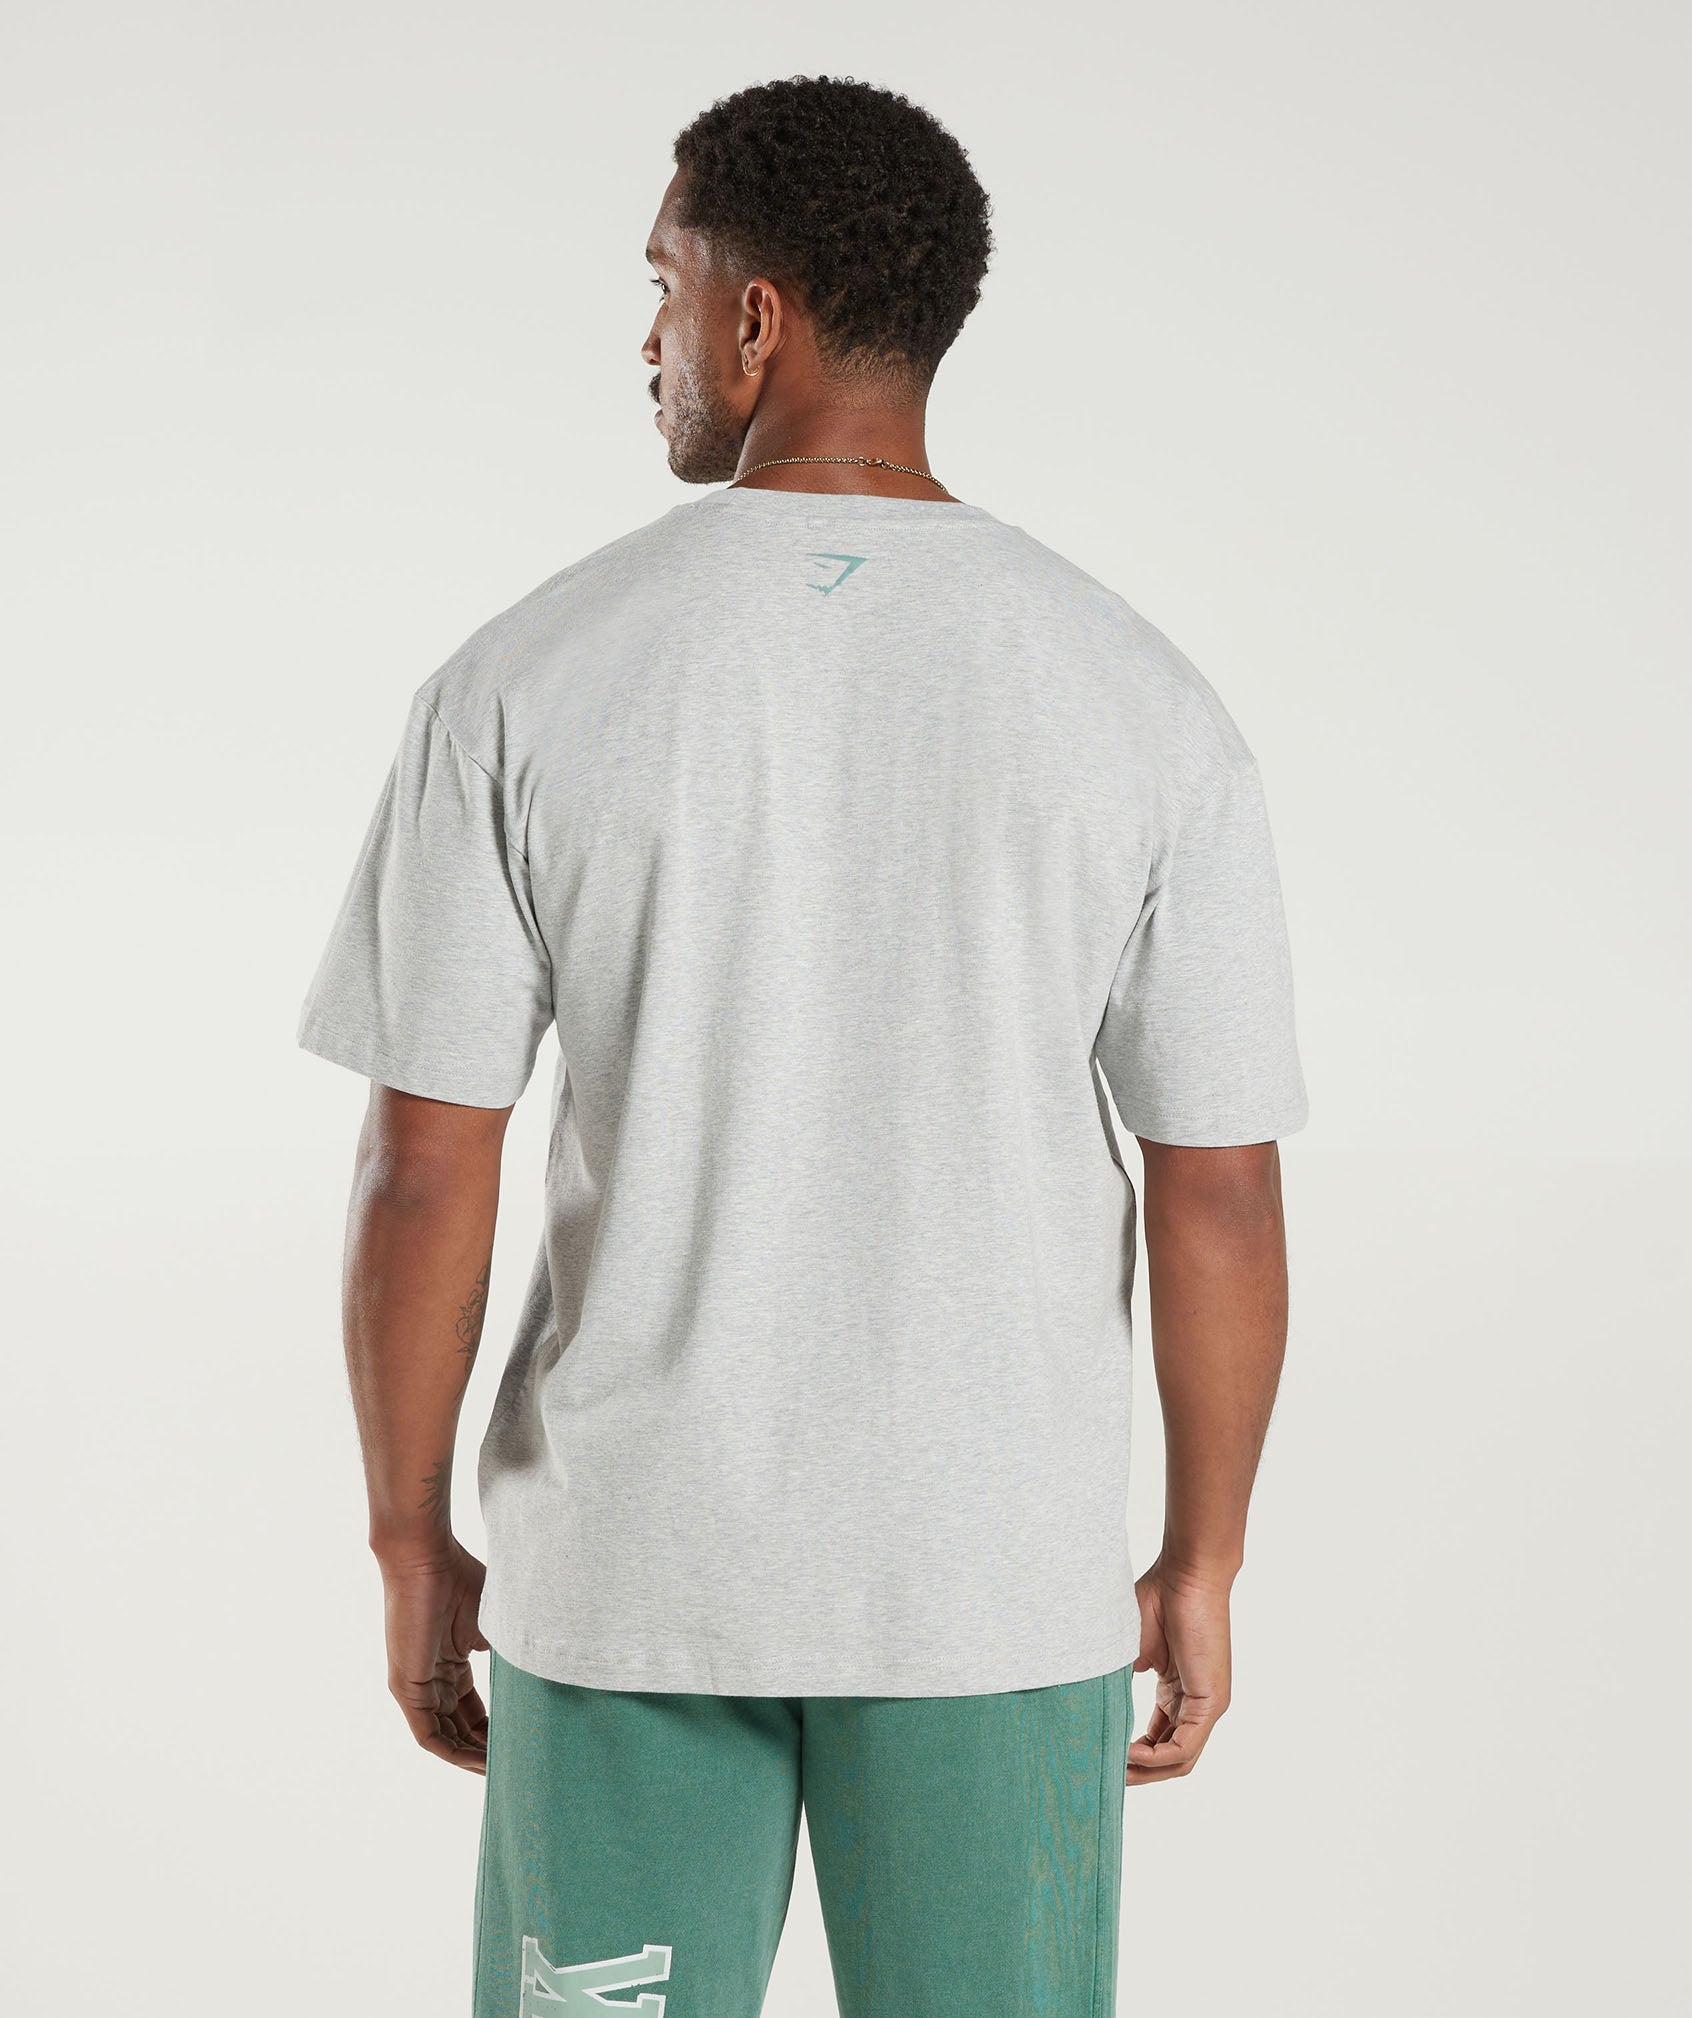 Collegiate Oversized T-Shirt in Light Grey Core Marl - view 2